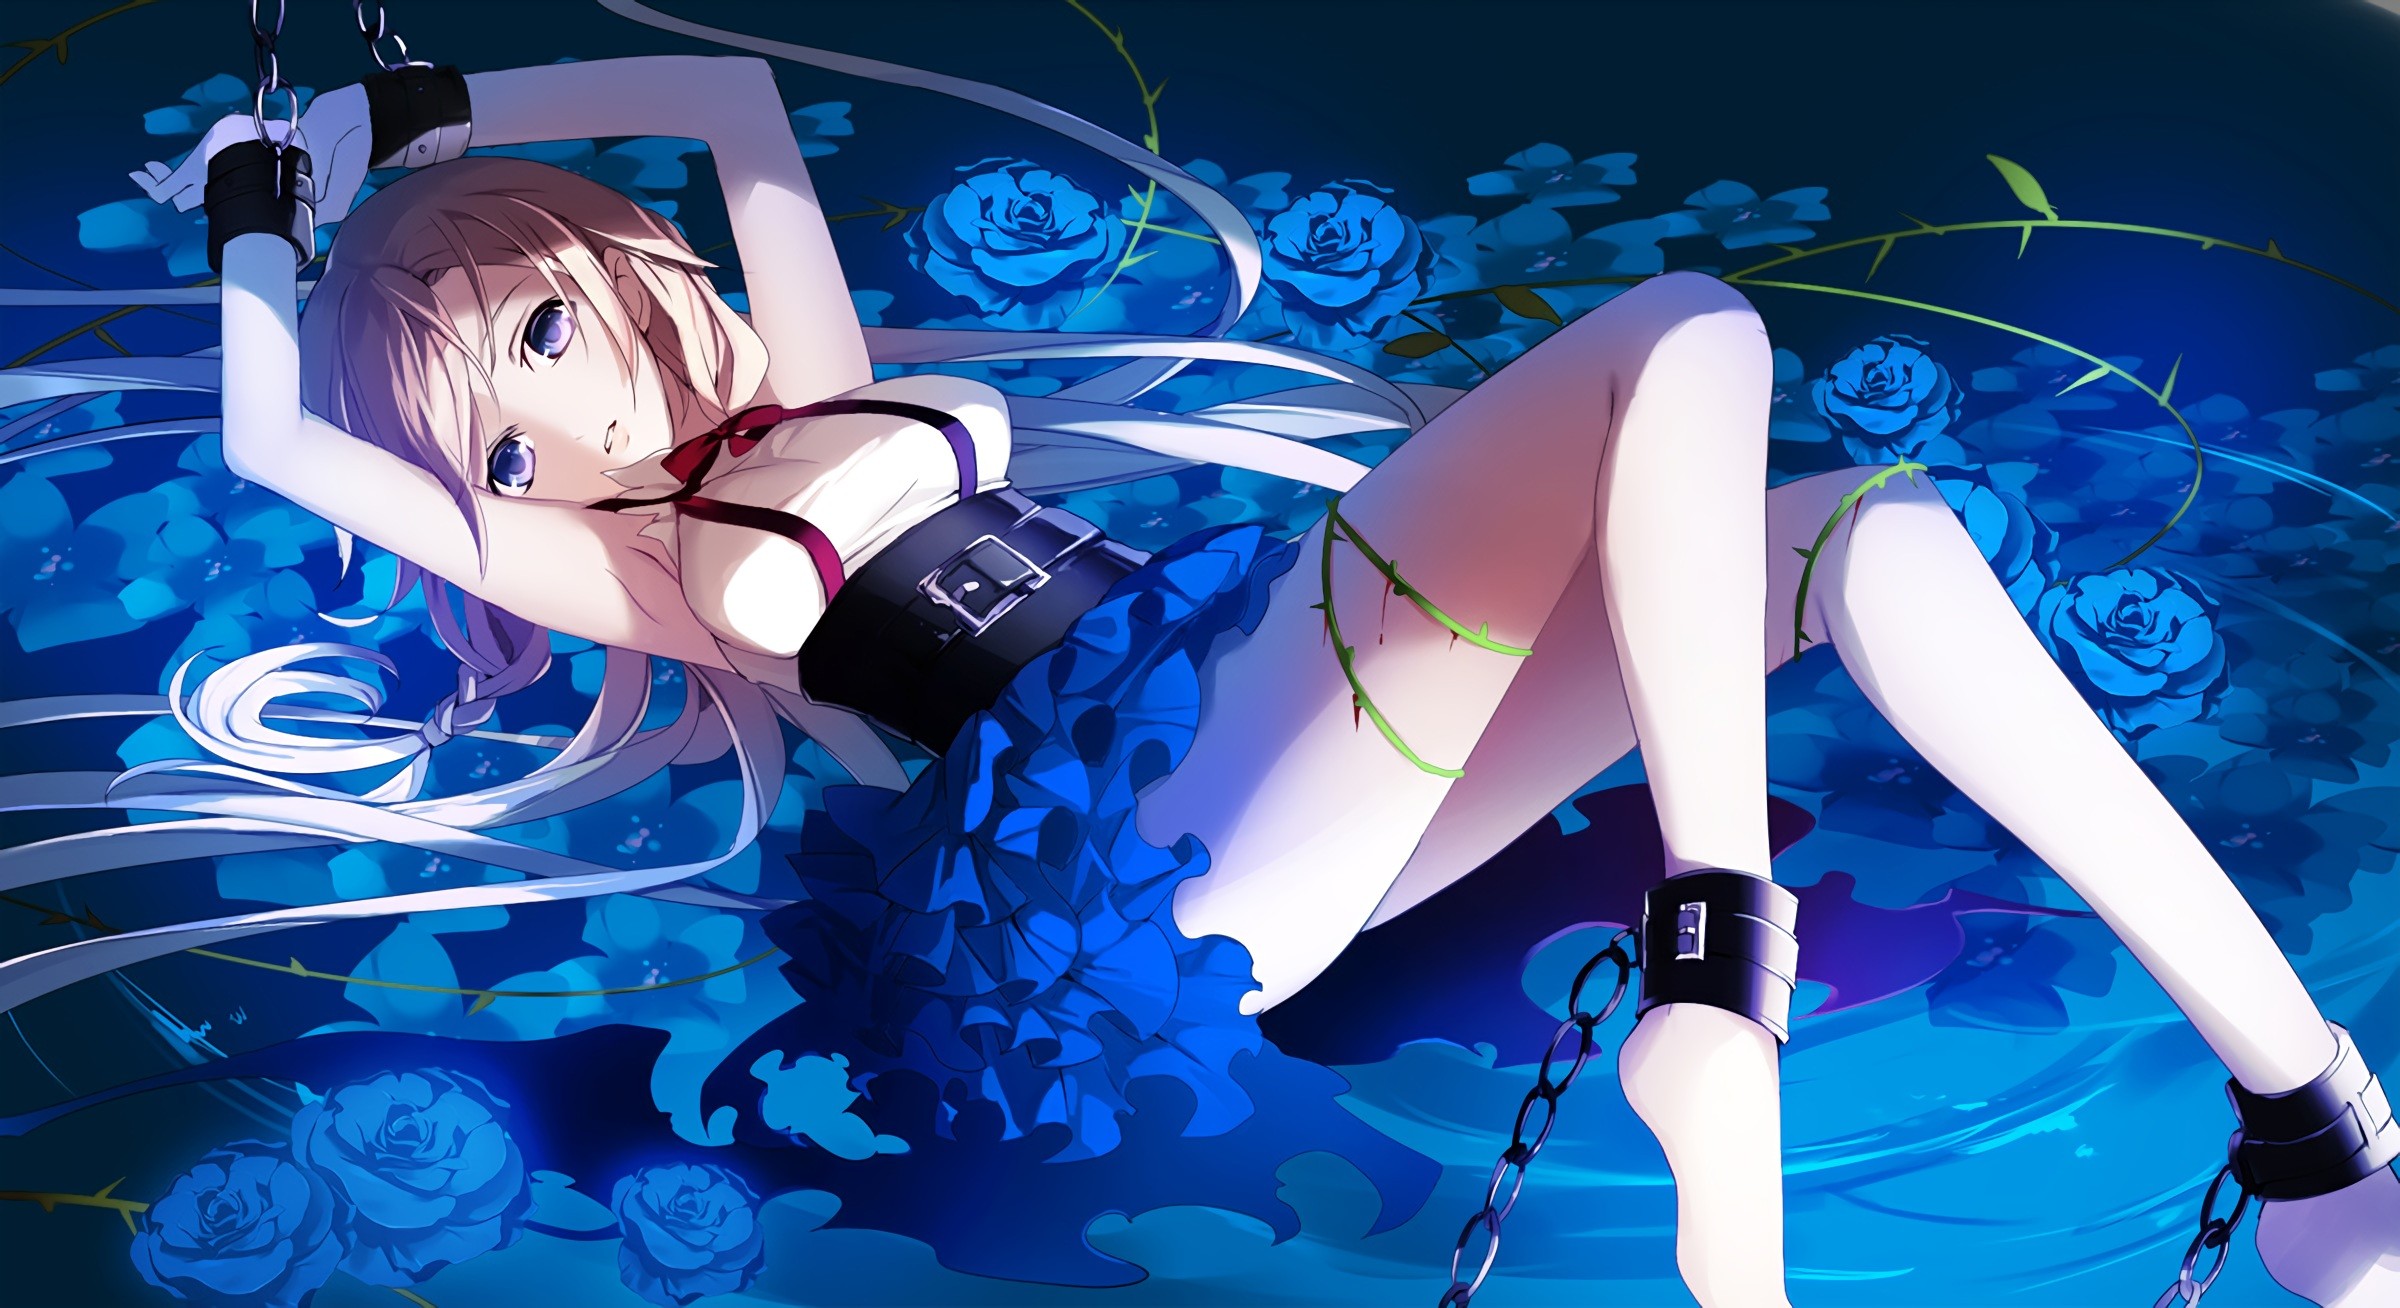 Anime 2400x1308 Vocaloid IA (Vocaloid) anime girls chains anime purple eyes flowers BDSM lying on back rose chained